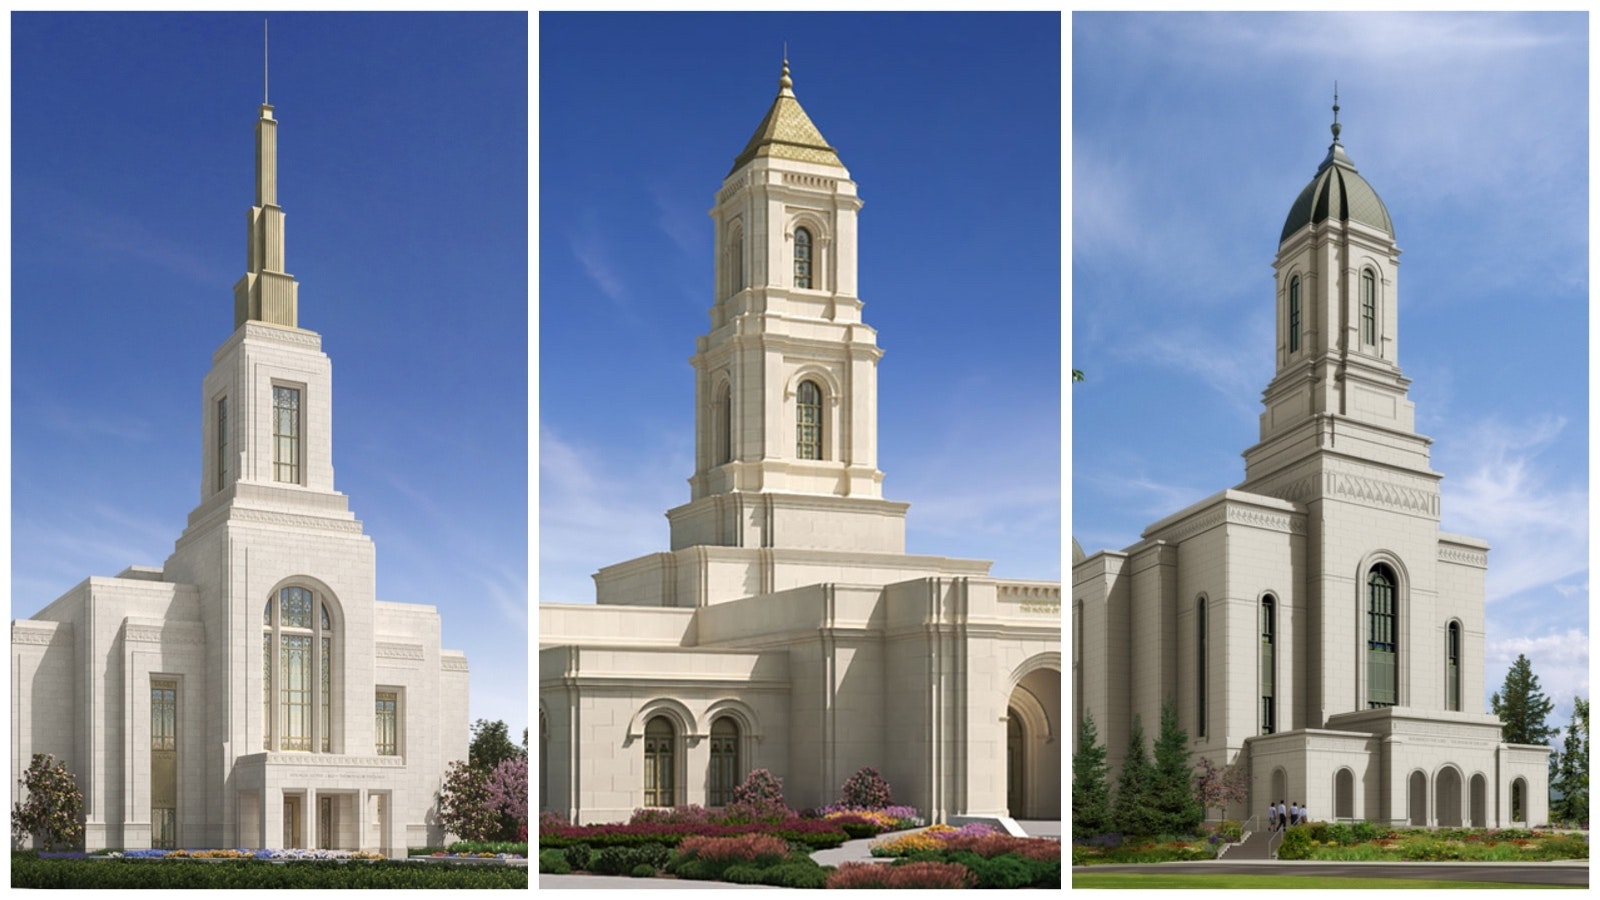 The Cody, Wyoming, temple (center) isn't alone in facing local opposition. Temple projects in Fairview, Texas (left) and Heber City, Utah (right) also are facing criticism and even legal action to stop them,